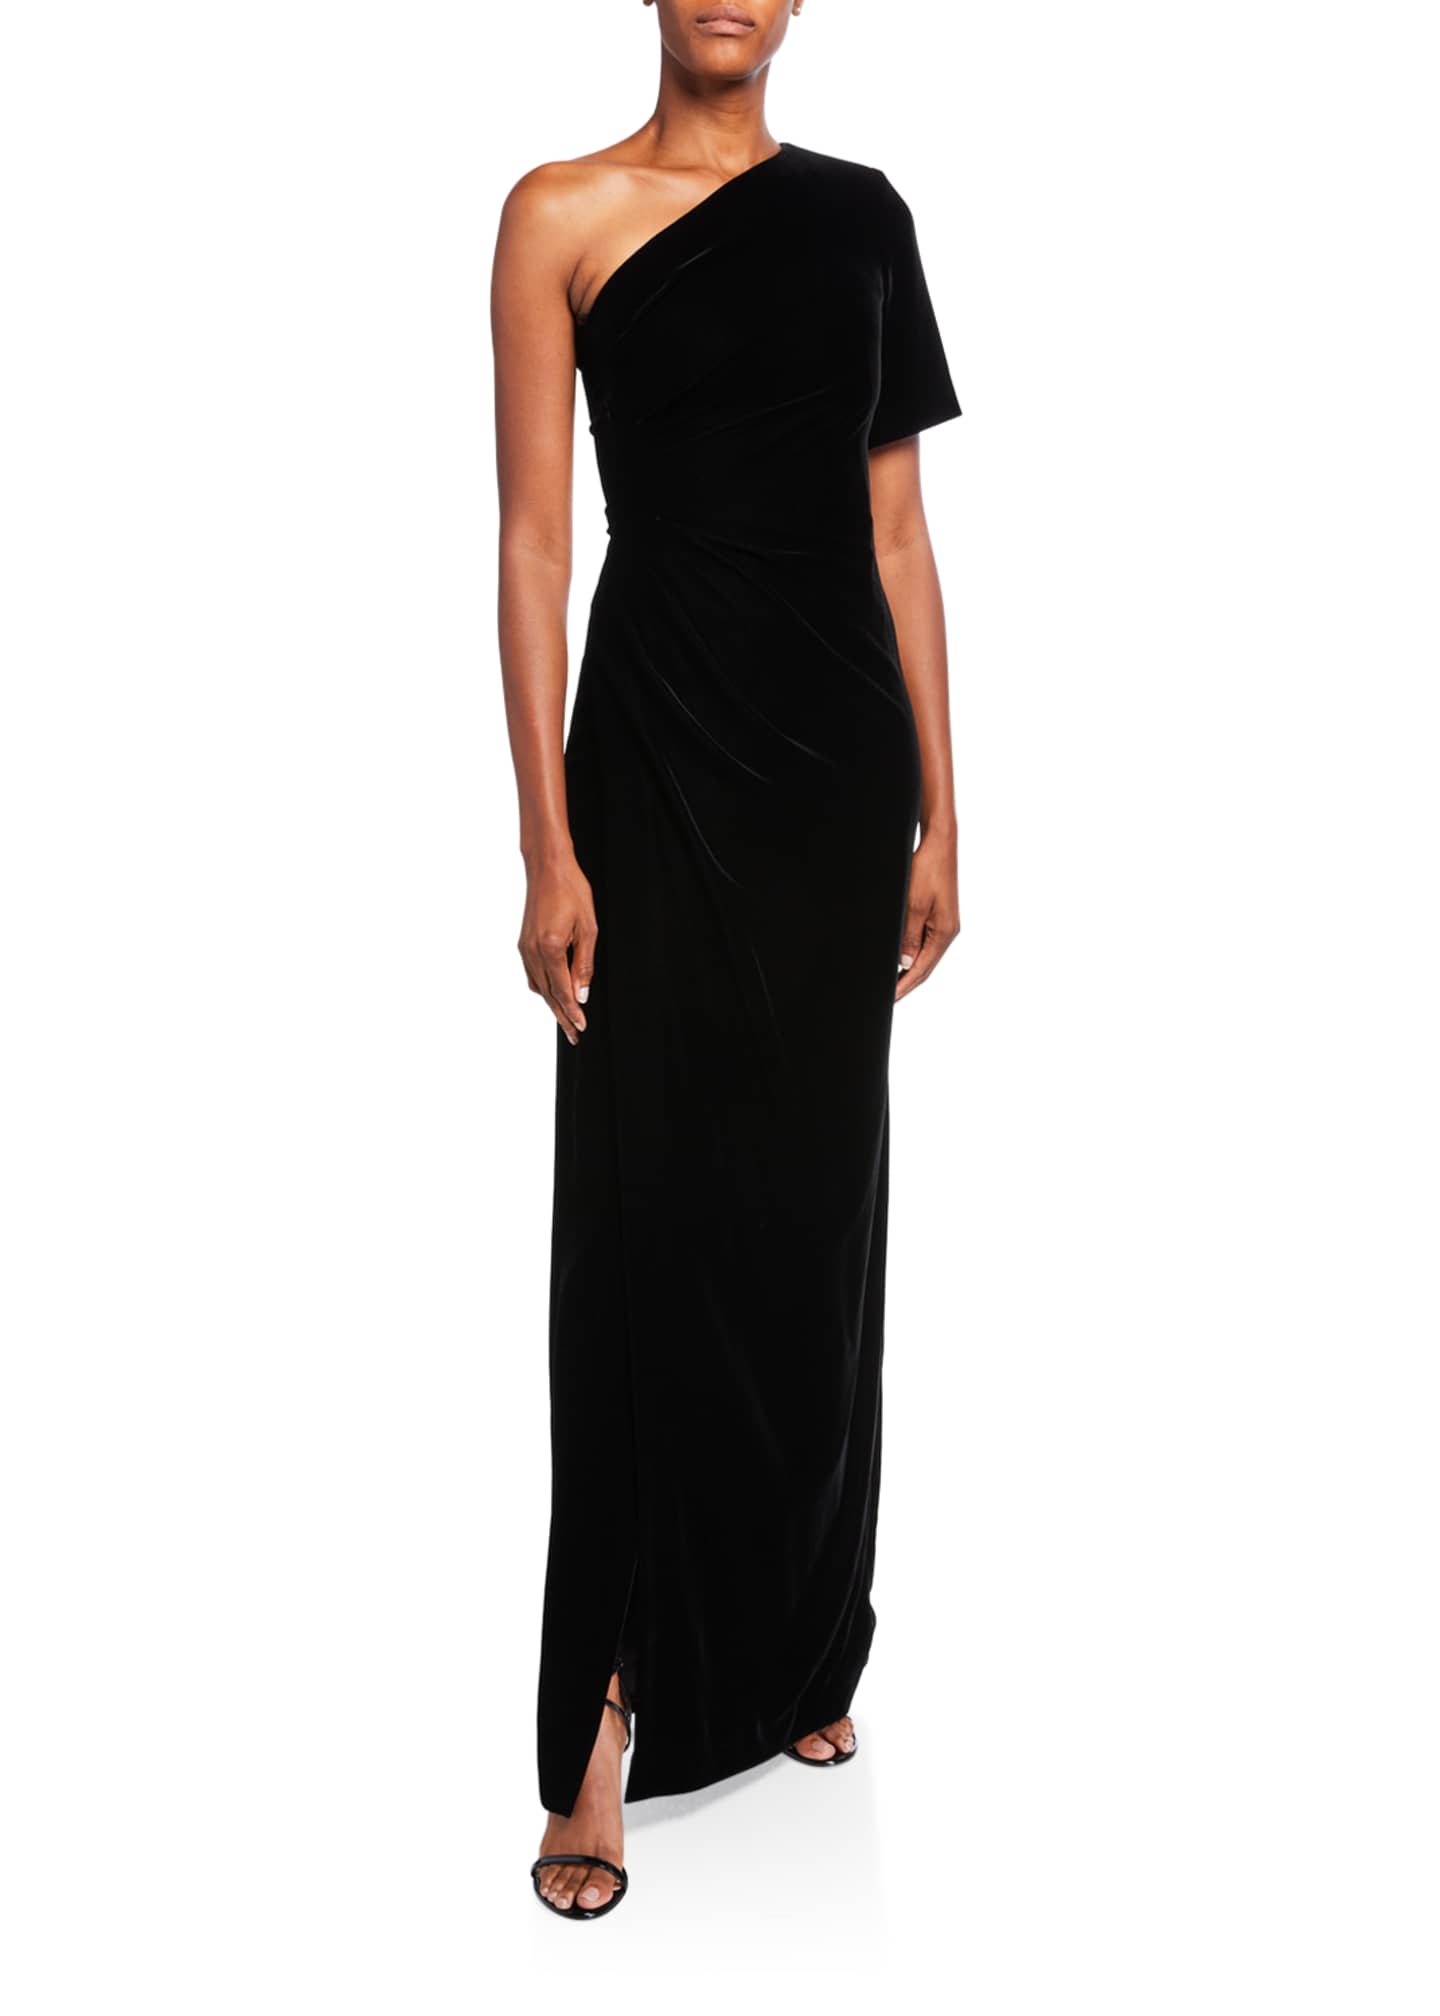 Givenchy Velvet One-Shoulder Fitted Gown - Bergdorf Goodman